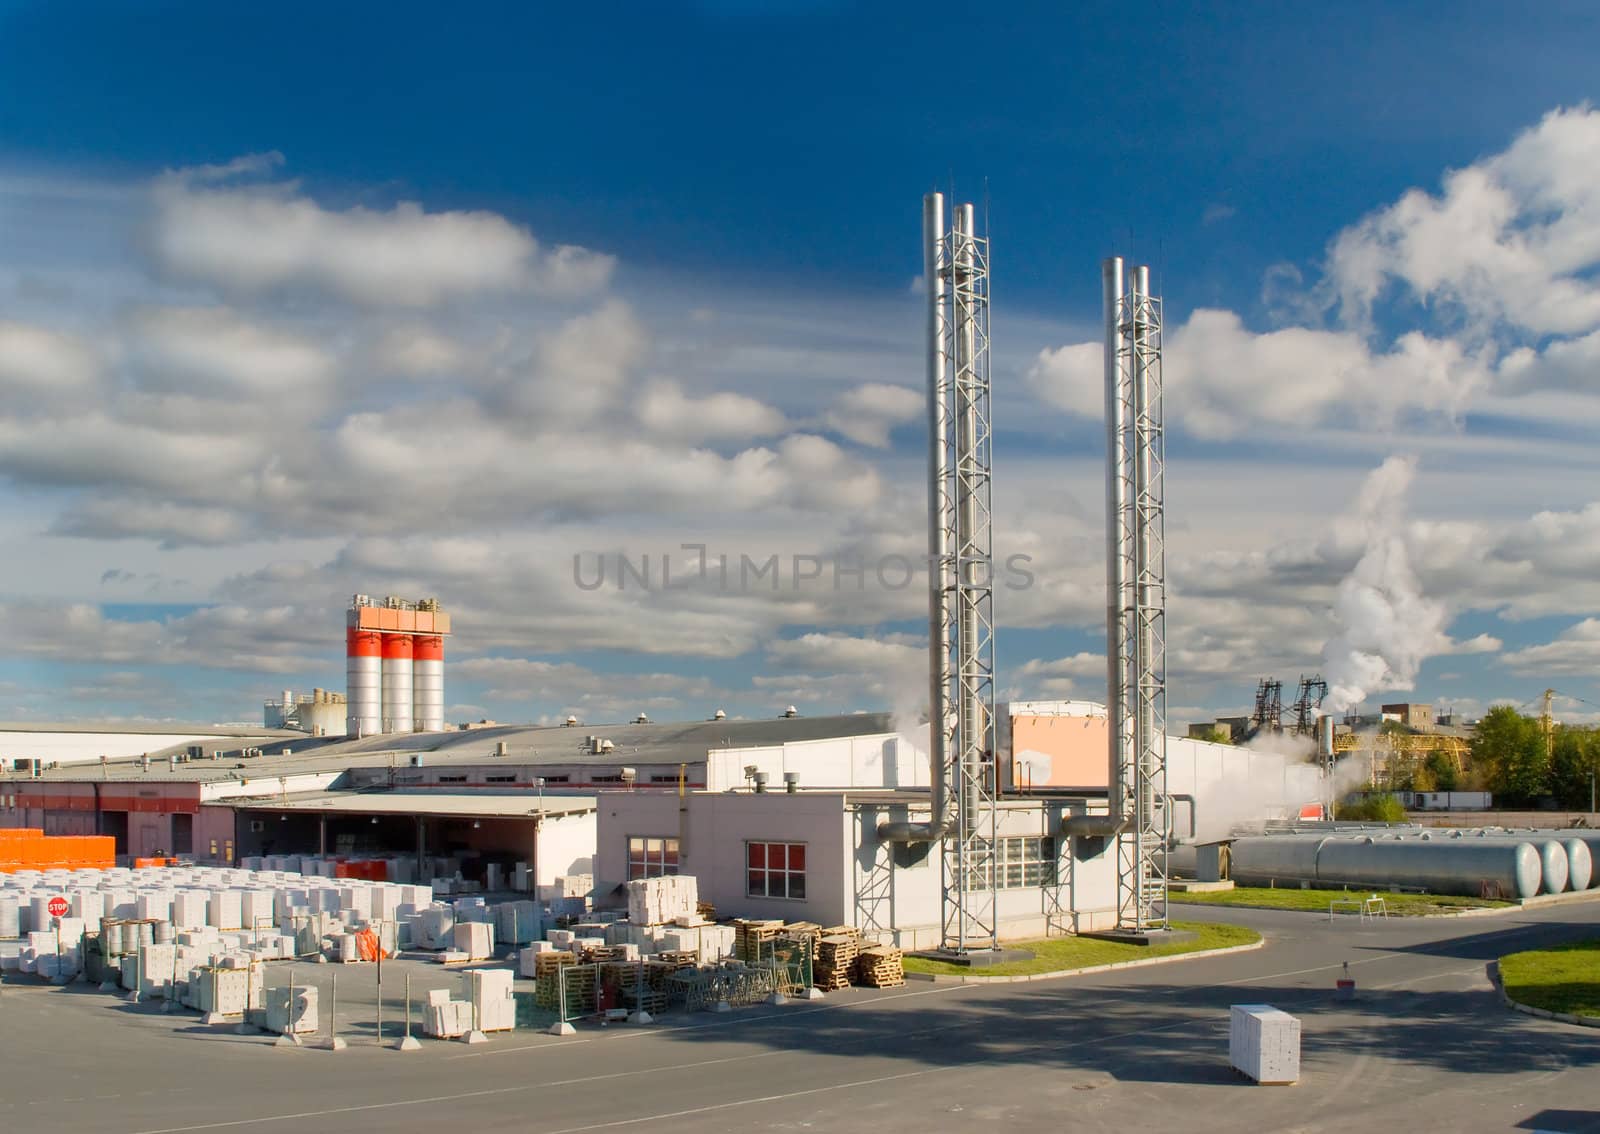 Factory with a chimney and smoke in sunny day